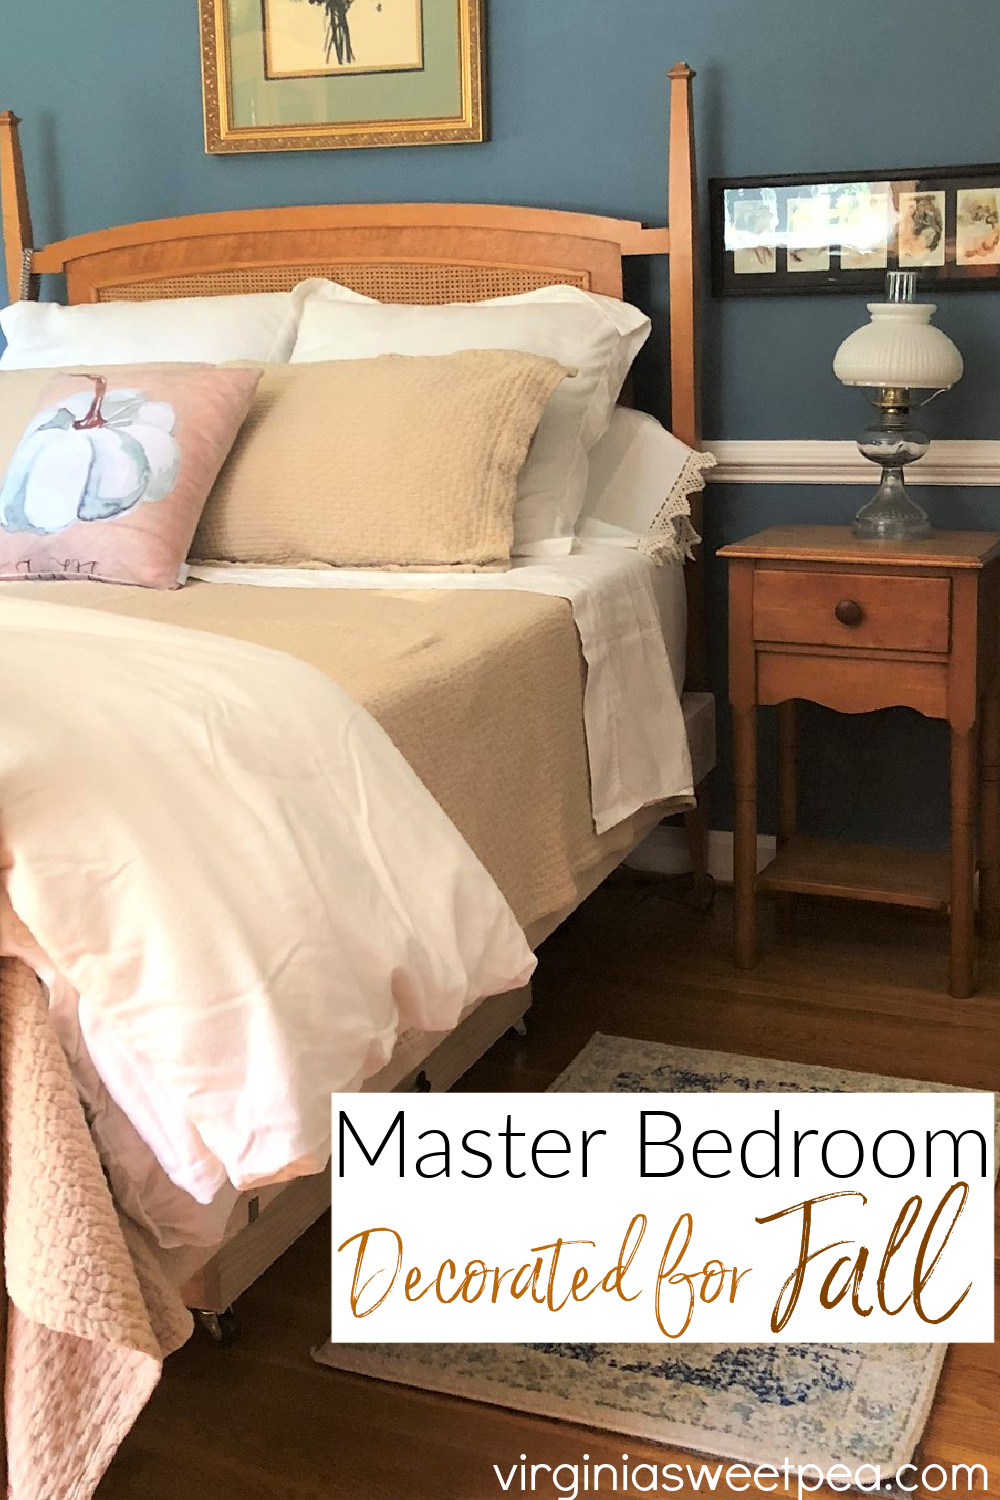 Master Bedroom Decorated for Fall with Antiques and Vintage